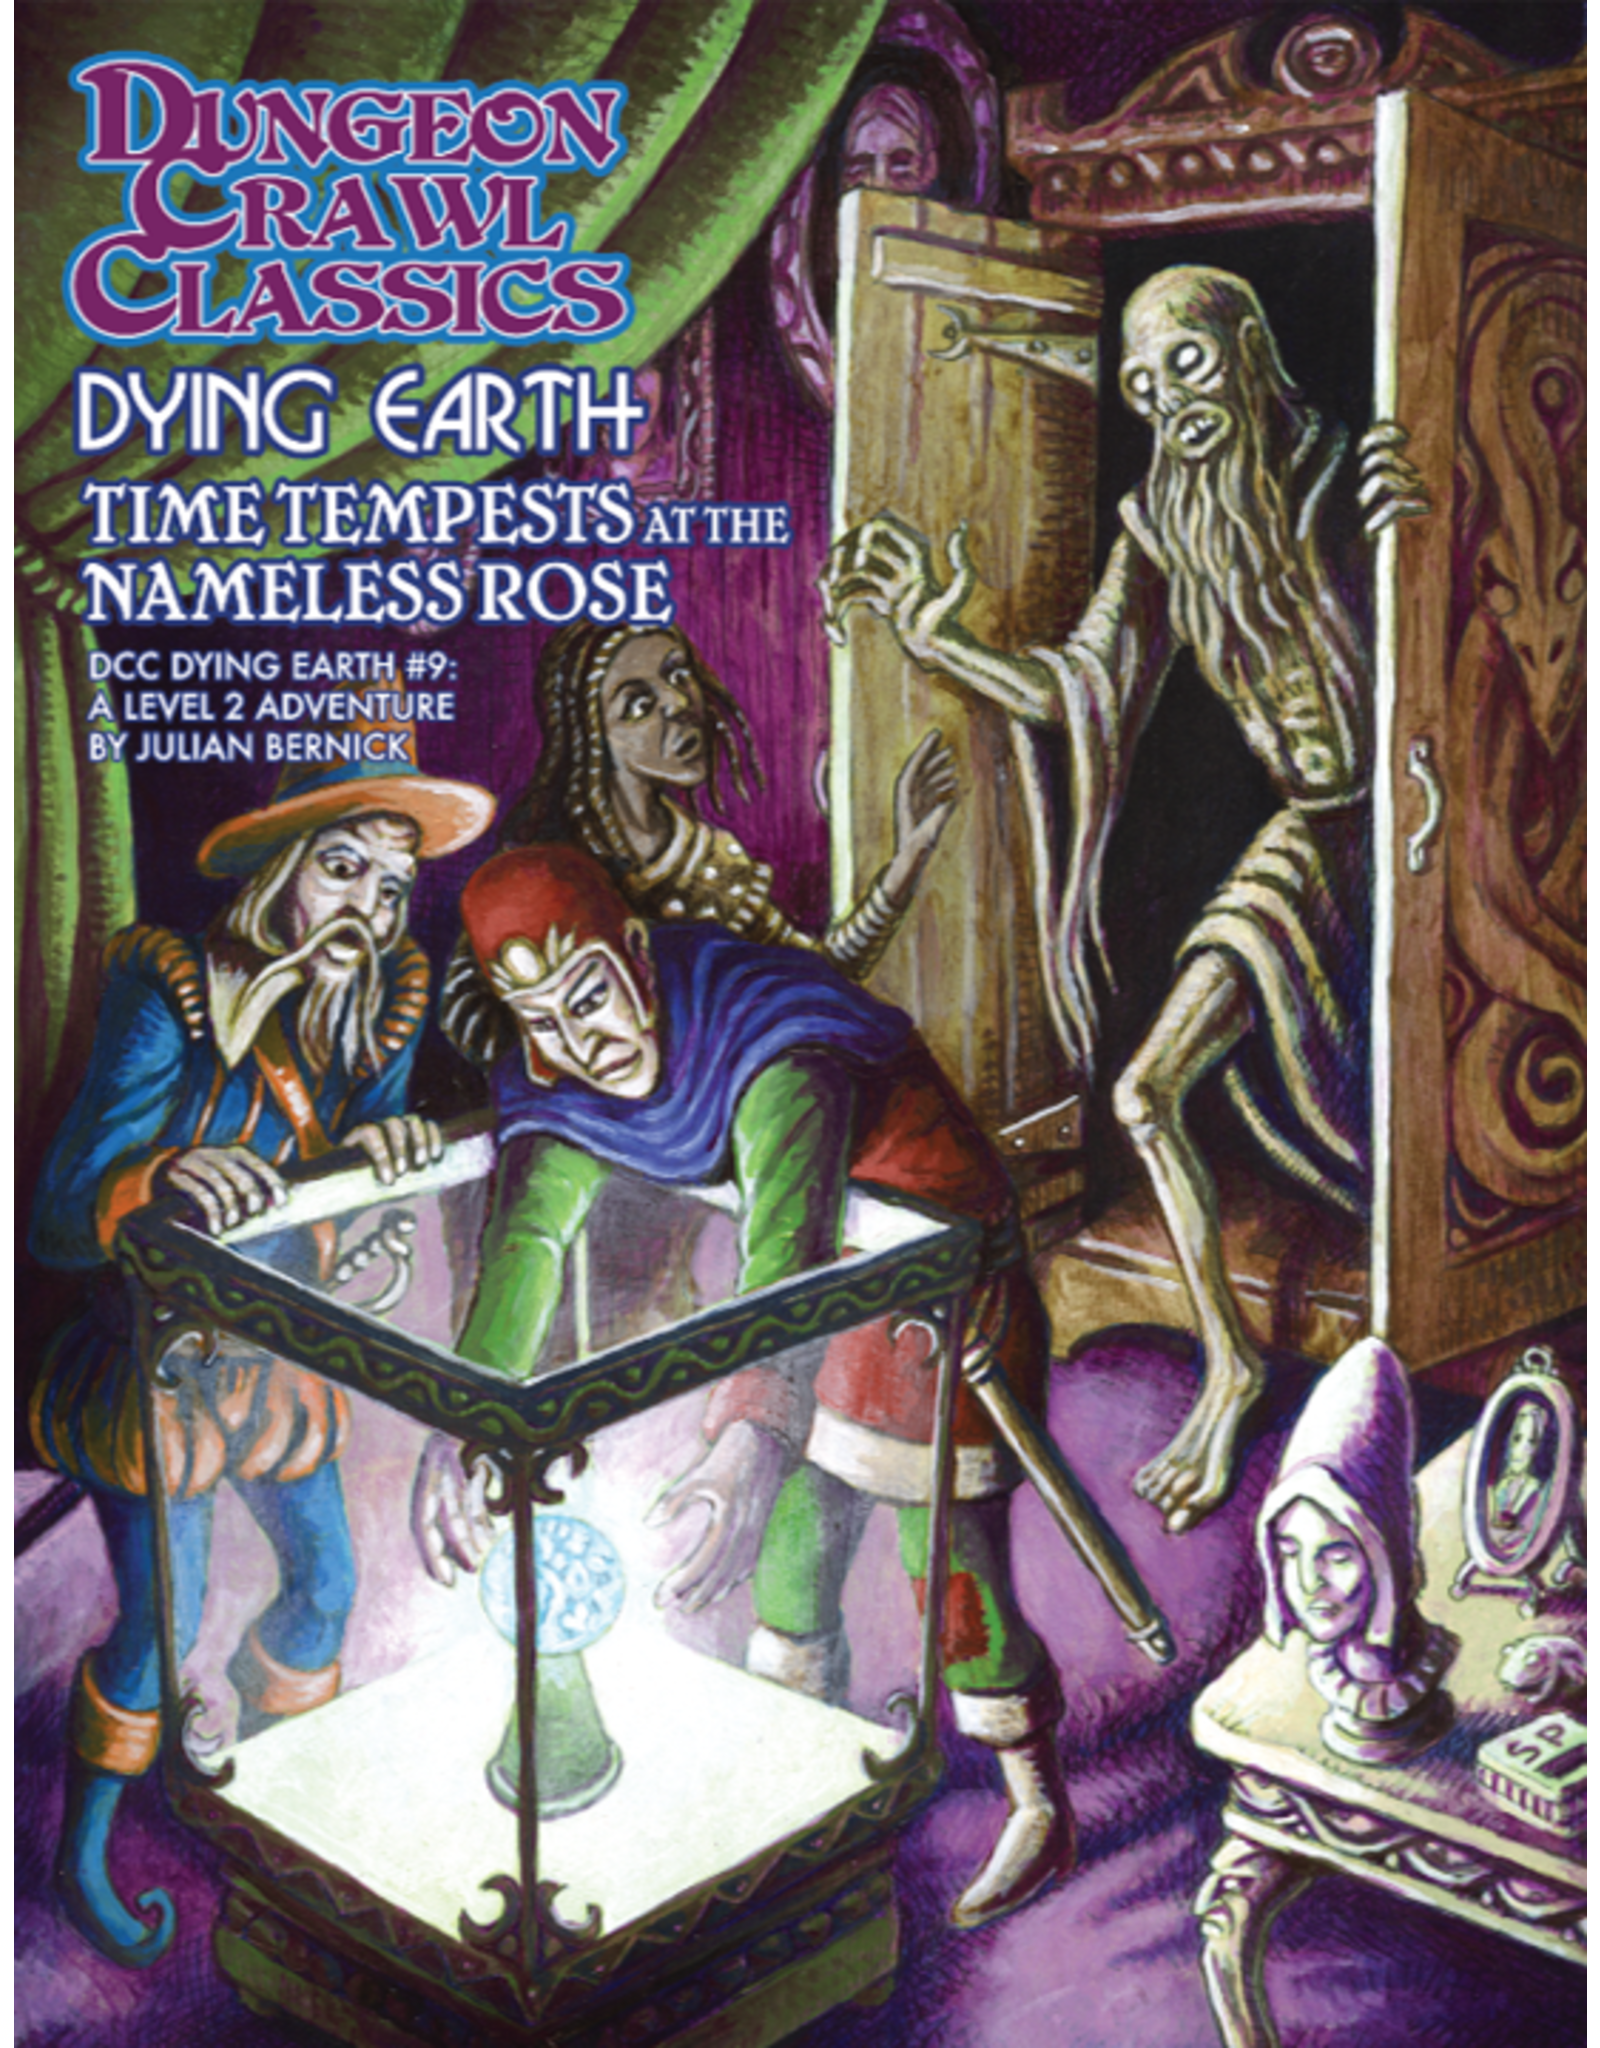 DCC Dying Earth #9: Time Tempests At Nameless Rose